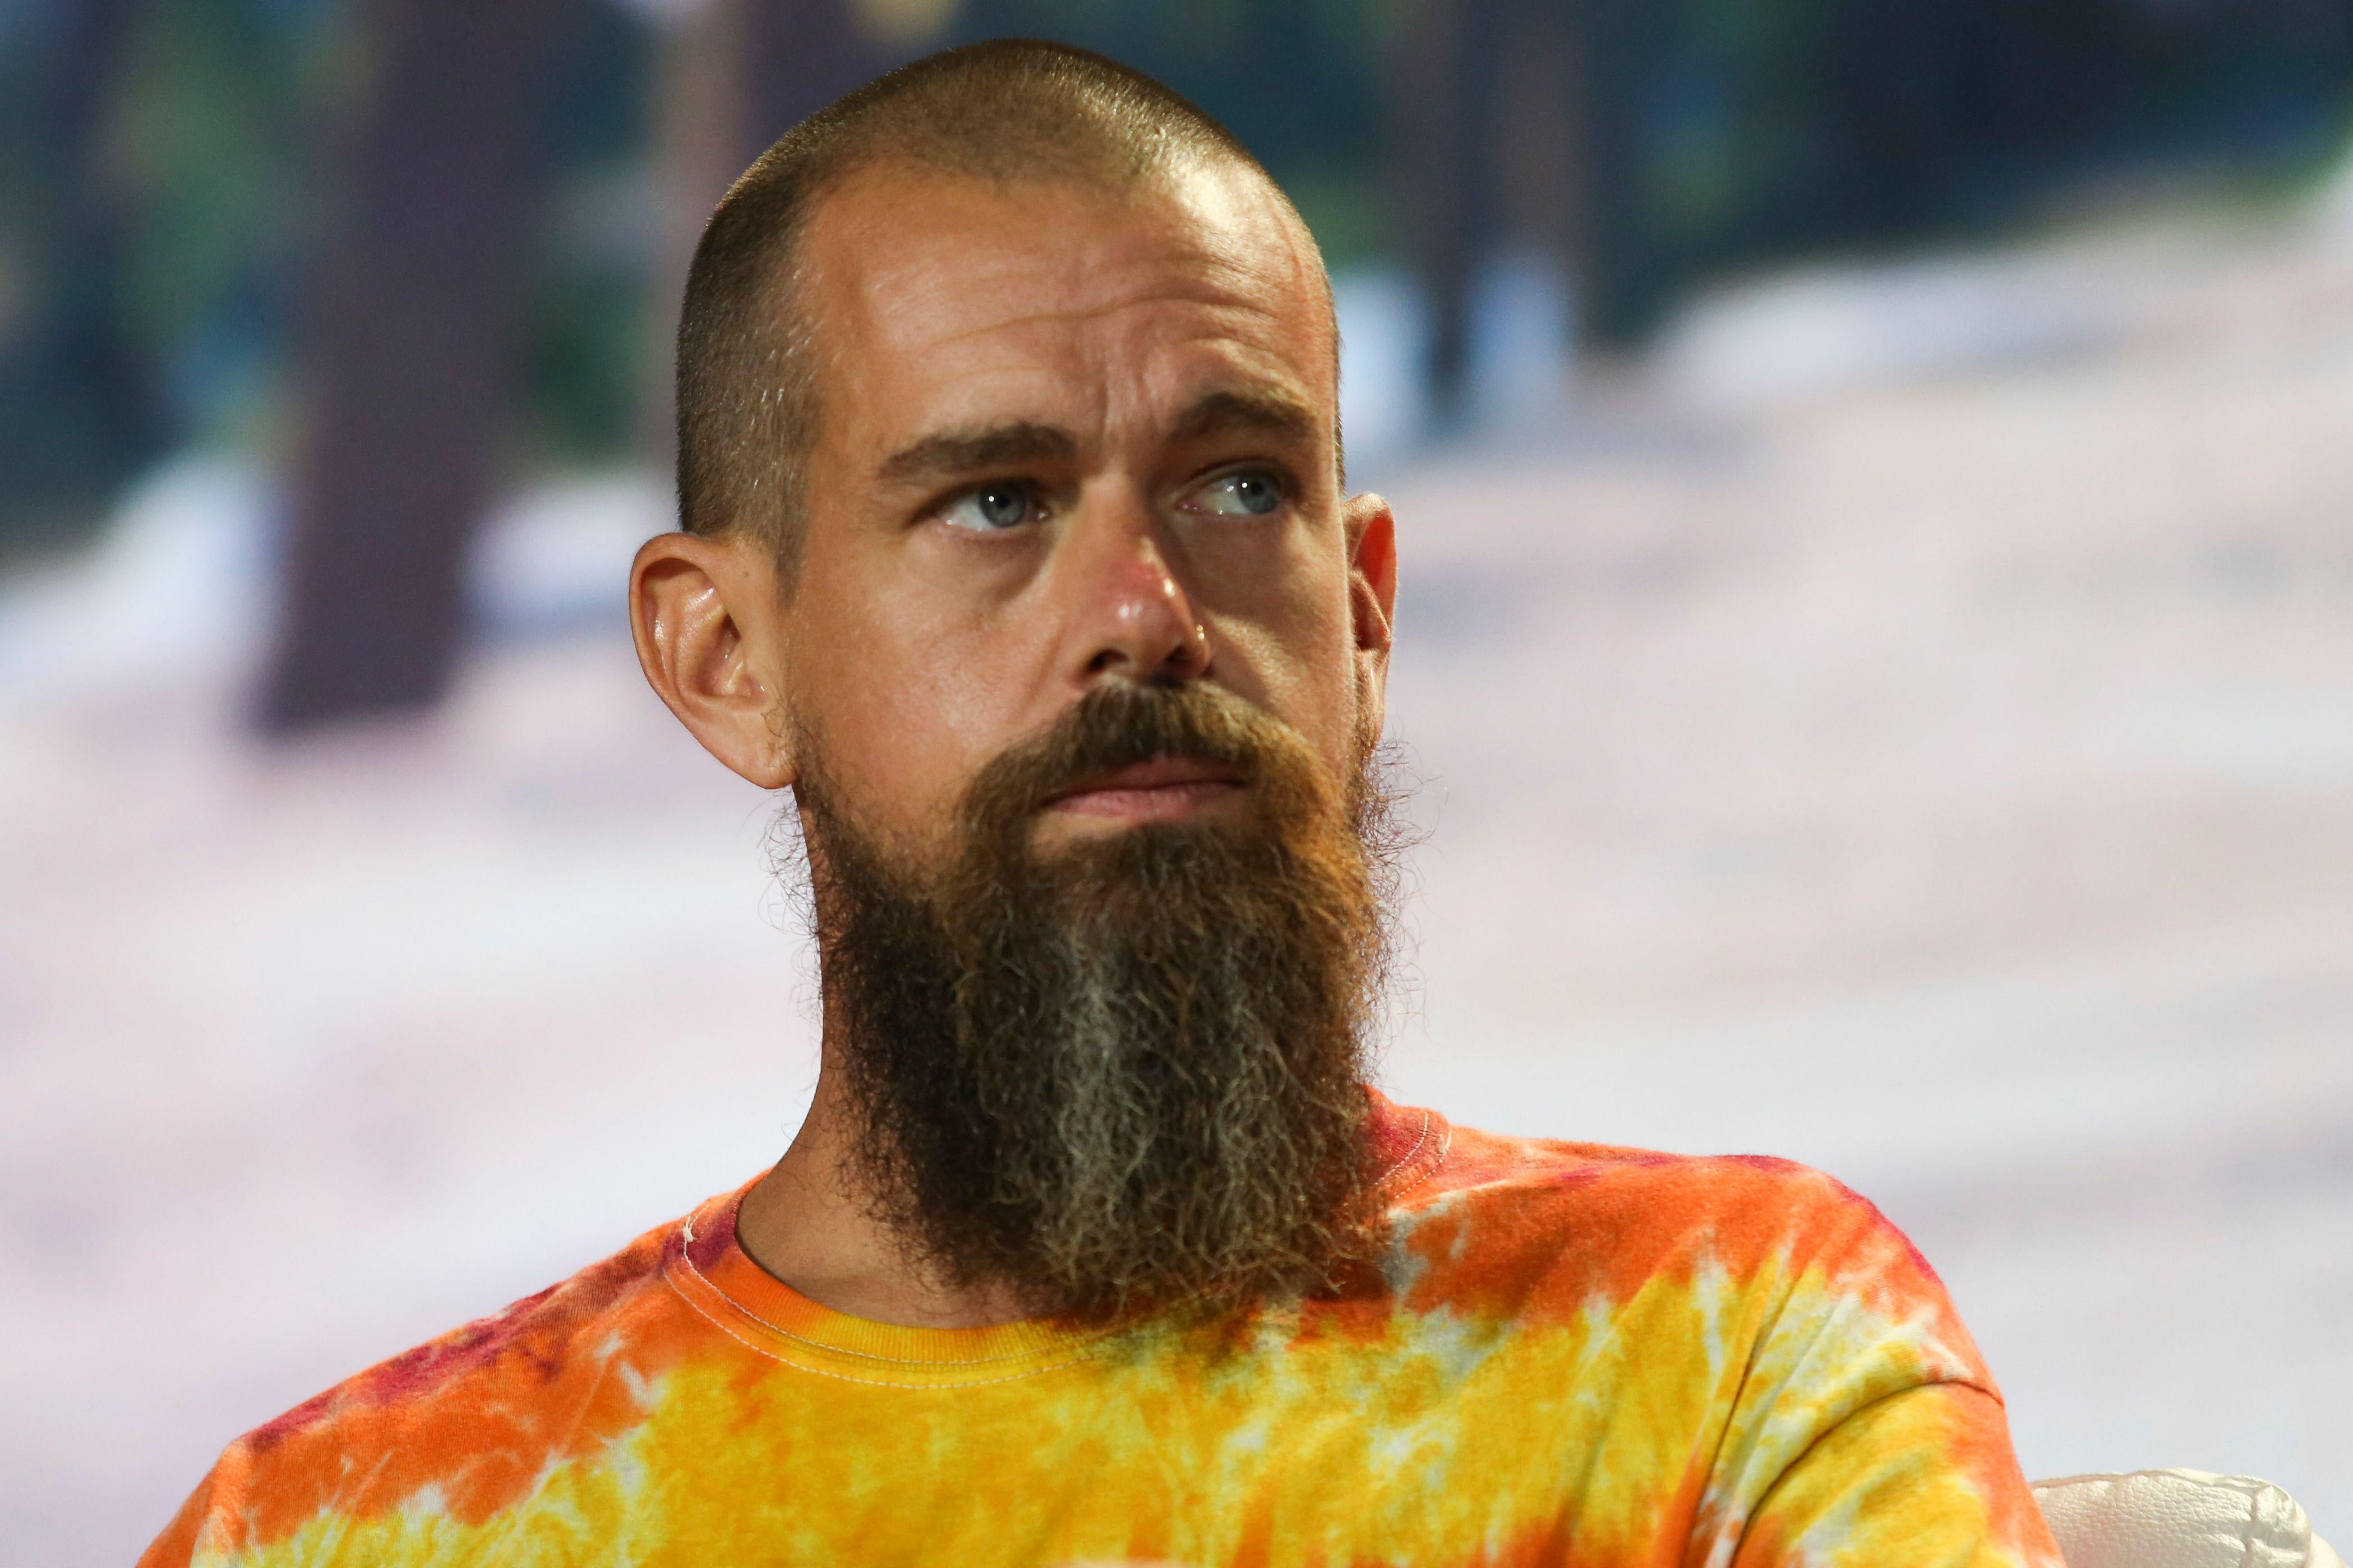 Jack Dorsey wears a tie-dye T-shirt on stage in front of a tropical background.